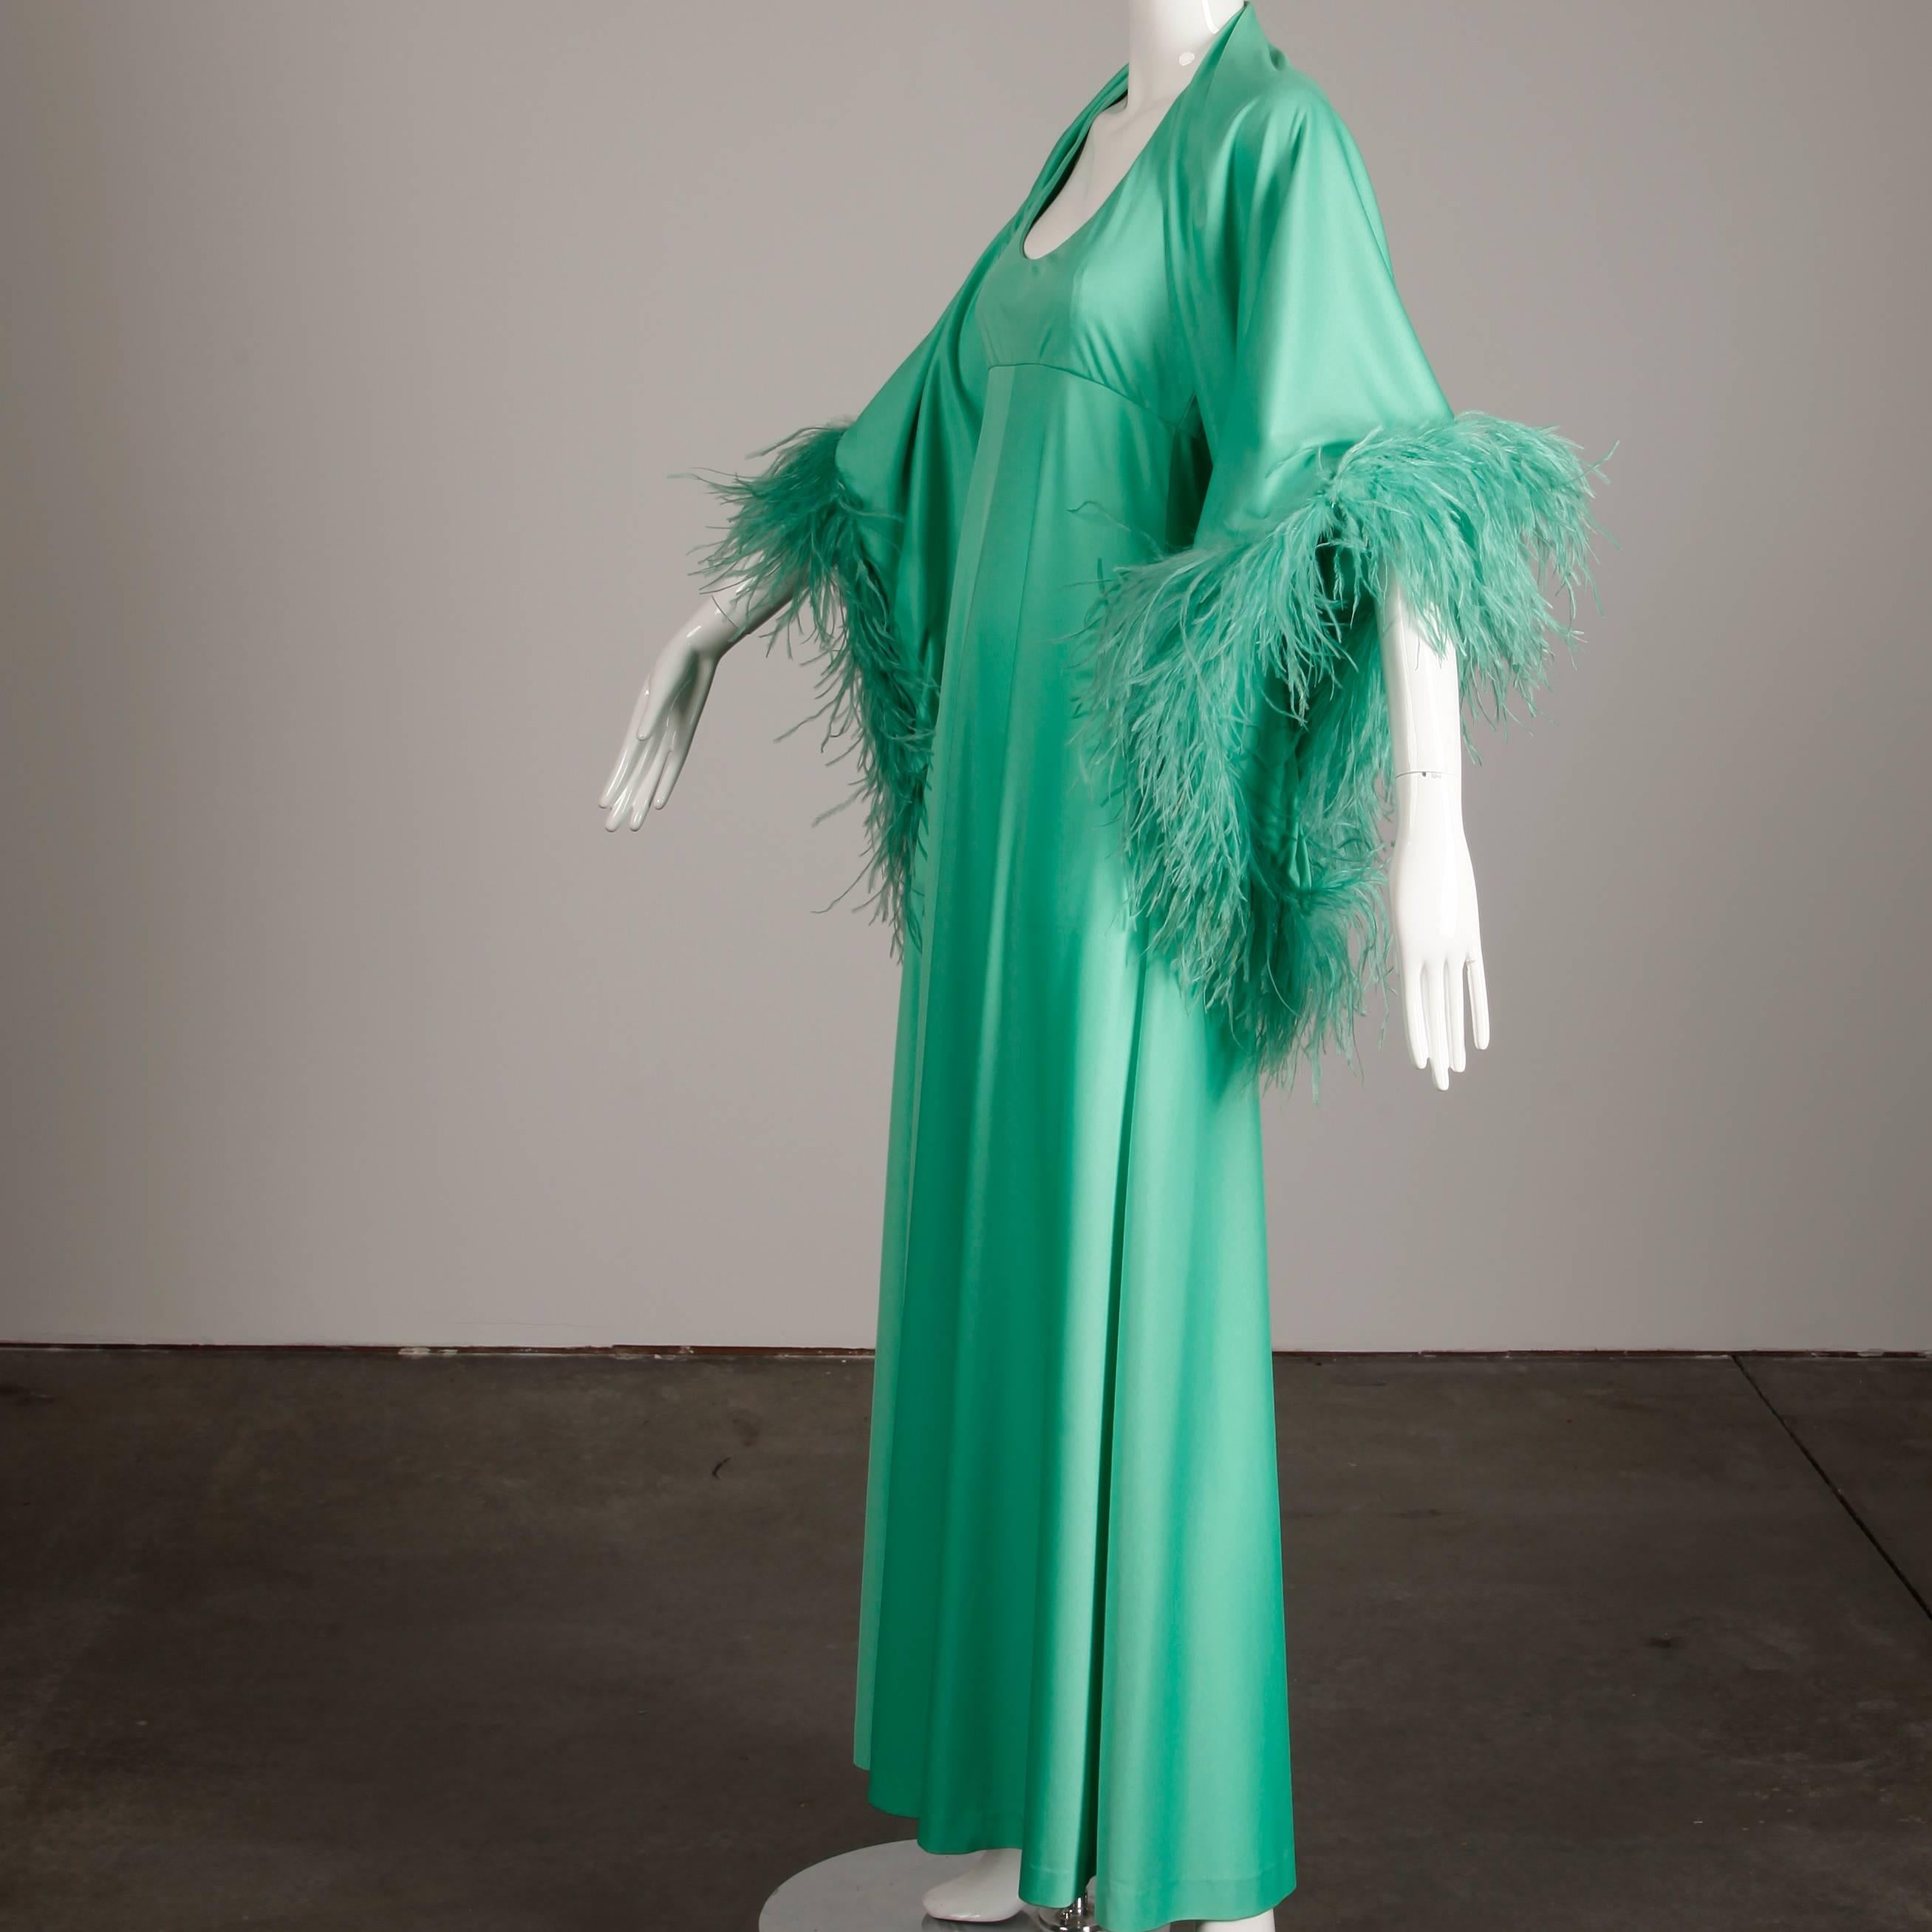 Vintage 2-piece ensemble by Joan Leslie by Kasper featuring a mint green jersey knit maxi dress with matching ostrich feather trimmed wrap. Partially lined with side zip and hook closure. The marked size is 10, but the ensemble fits like a modern